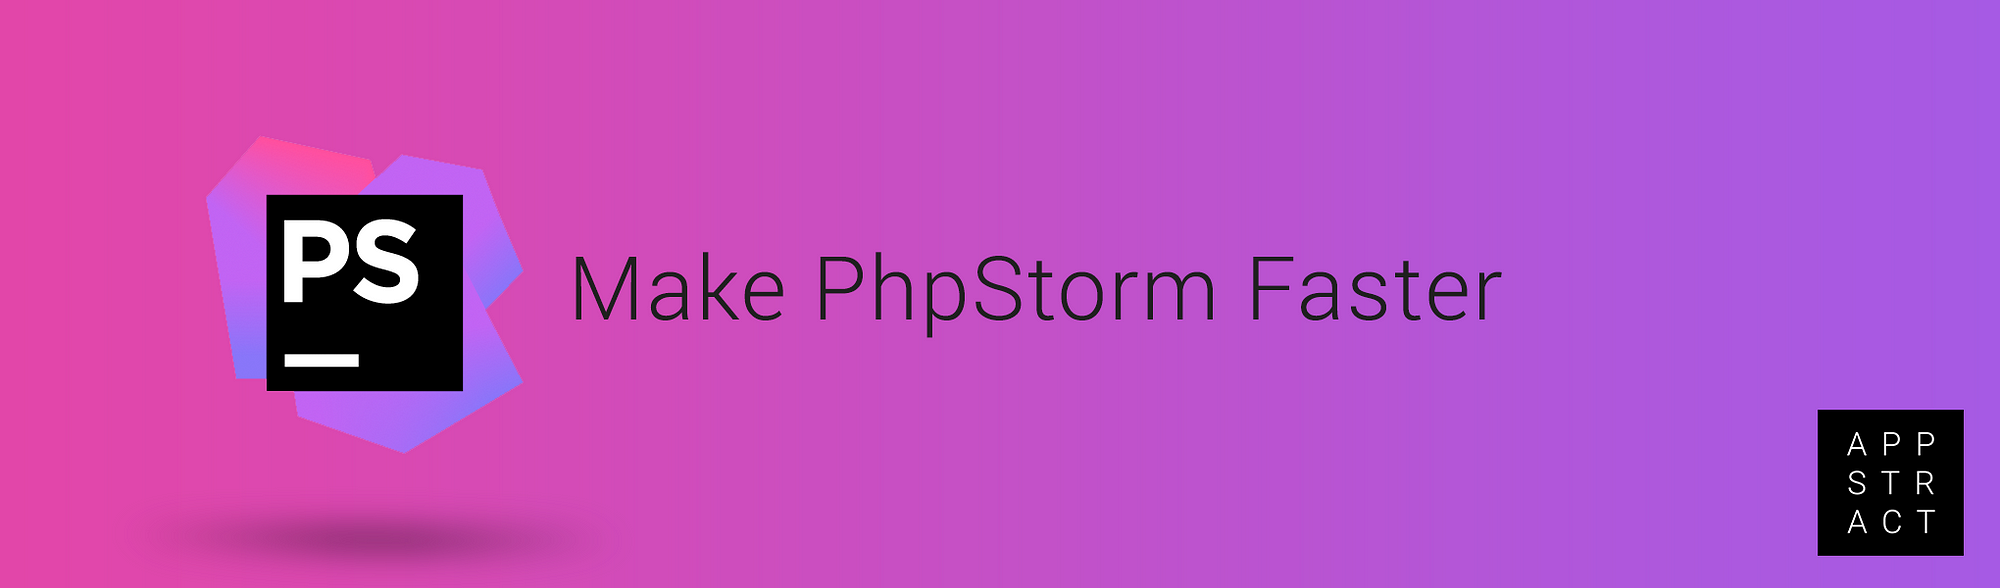 A Few Quick Tips to Make PhpStorm Faster | by Olav van Schie | Appstract |  Medium